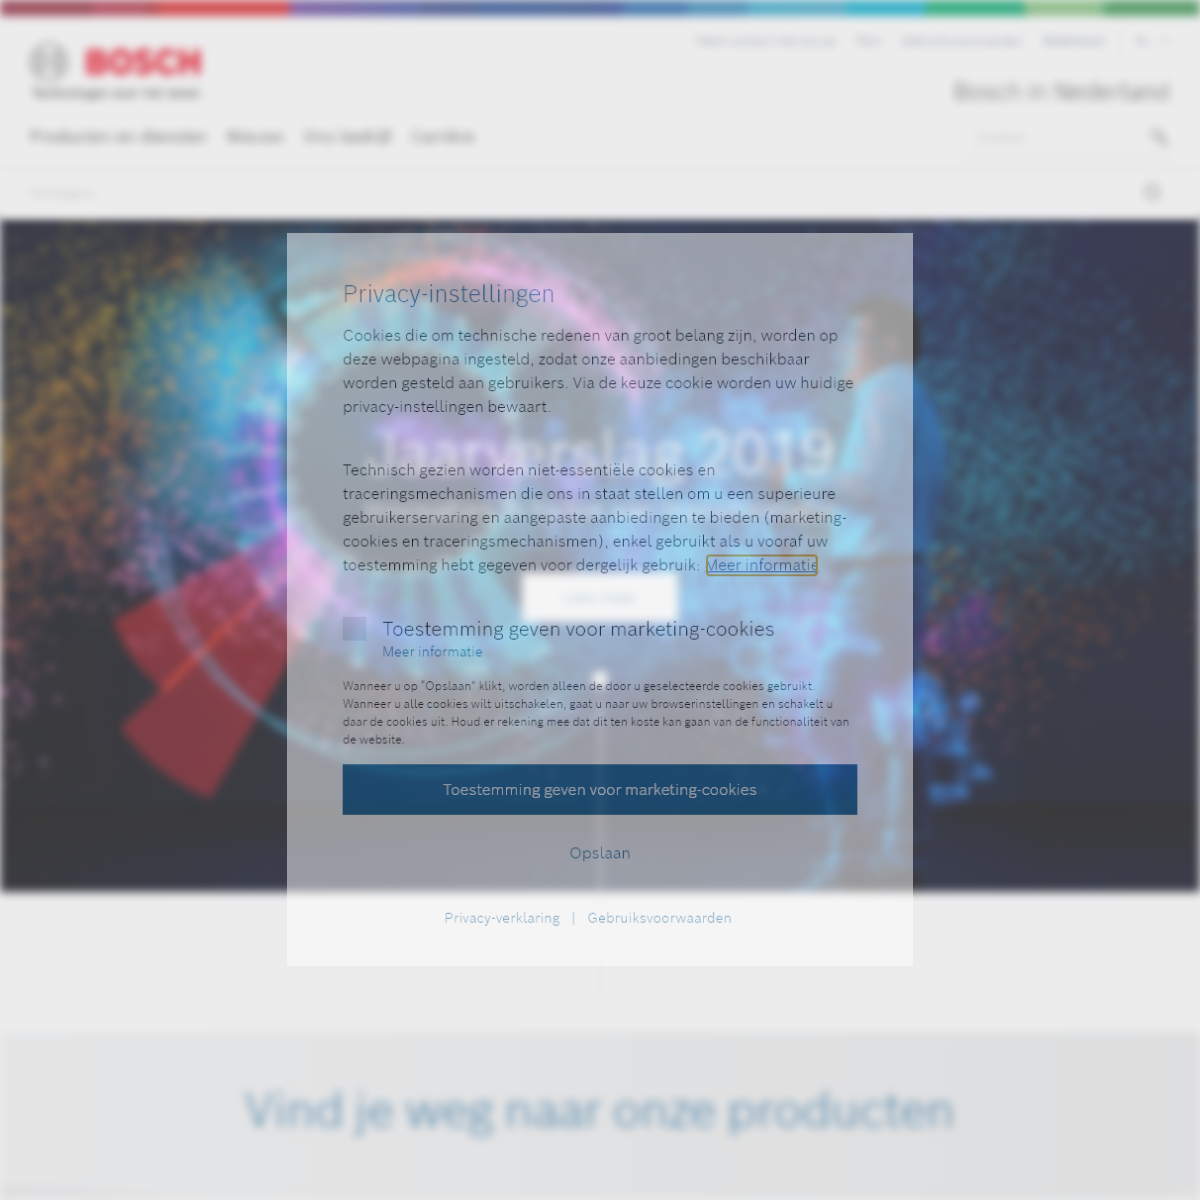 A complete backup of bosch.nl